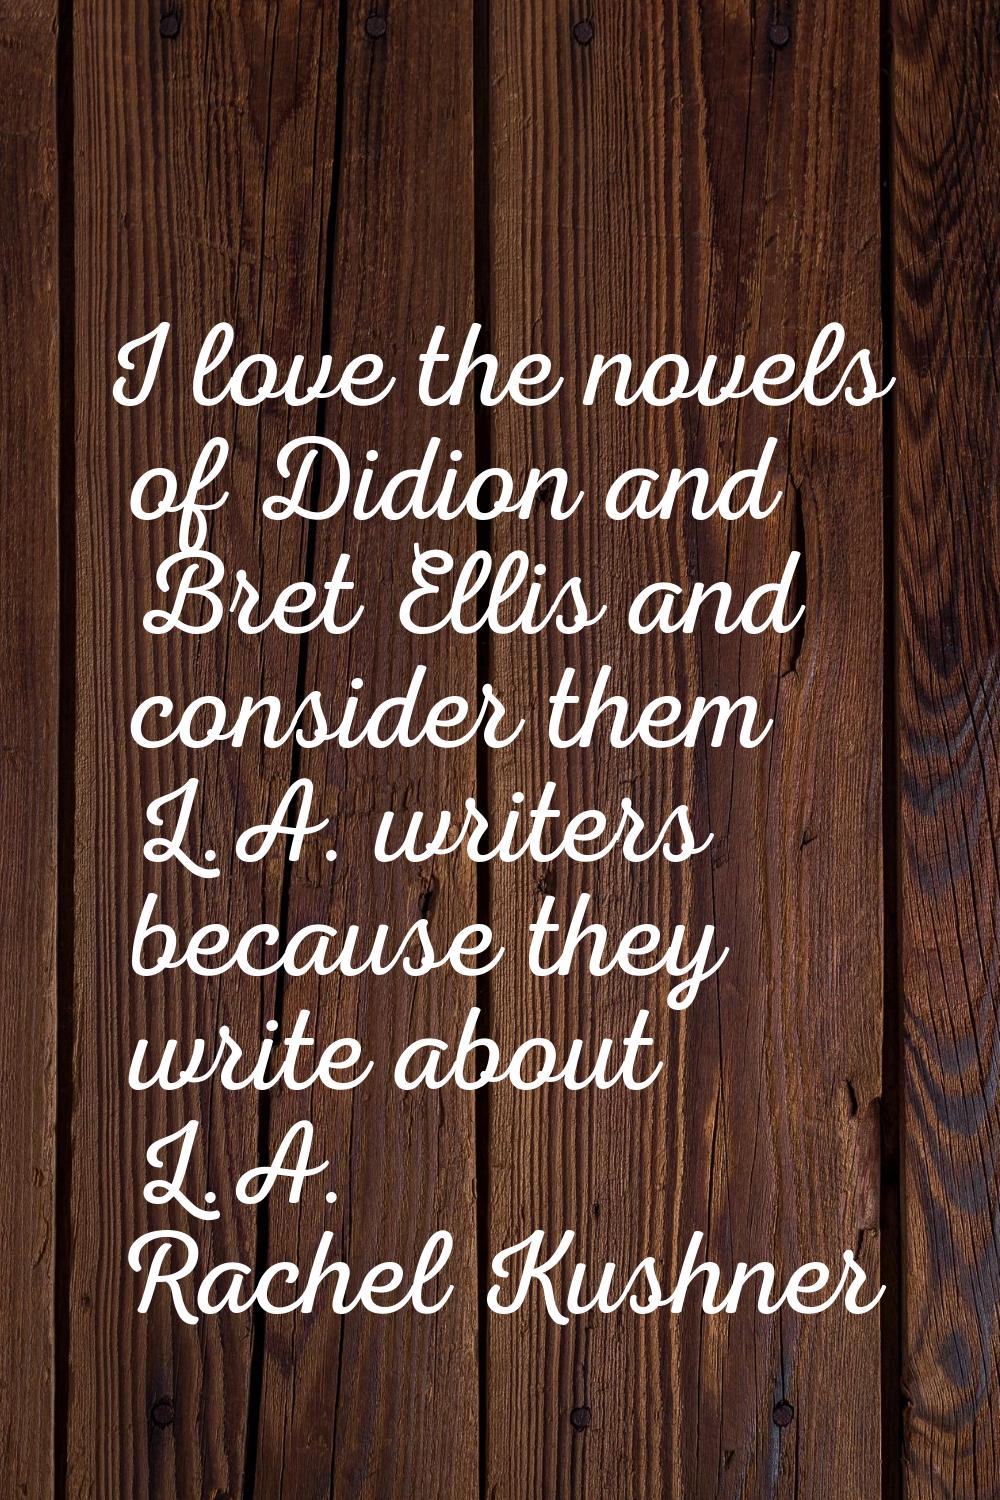 I love the novels of Didion and Bret Ellis and consider them L.A. writers because they write about 